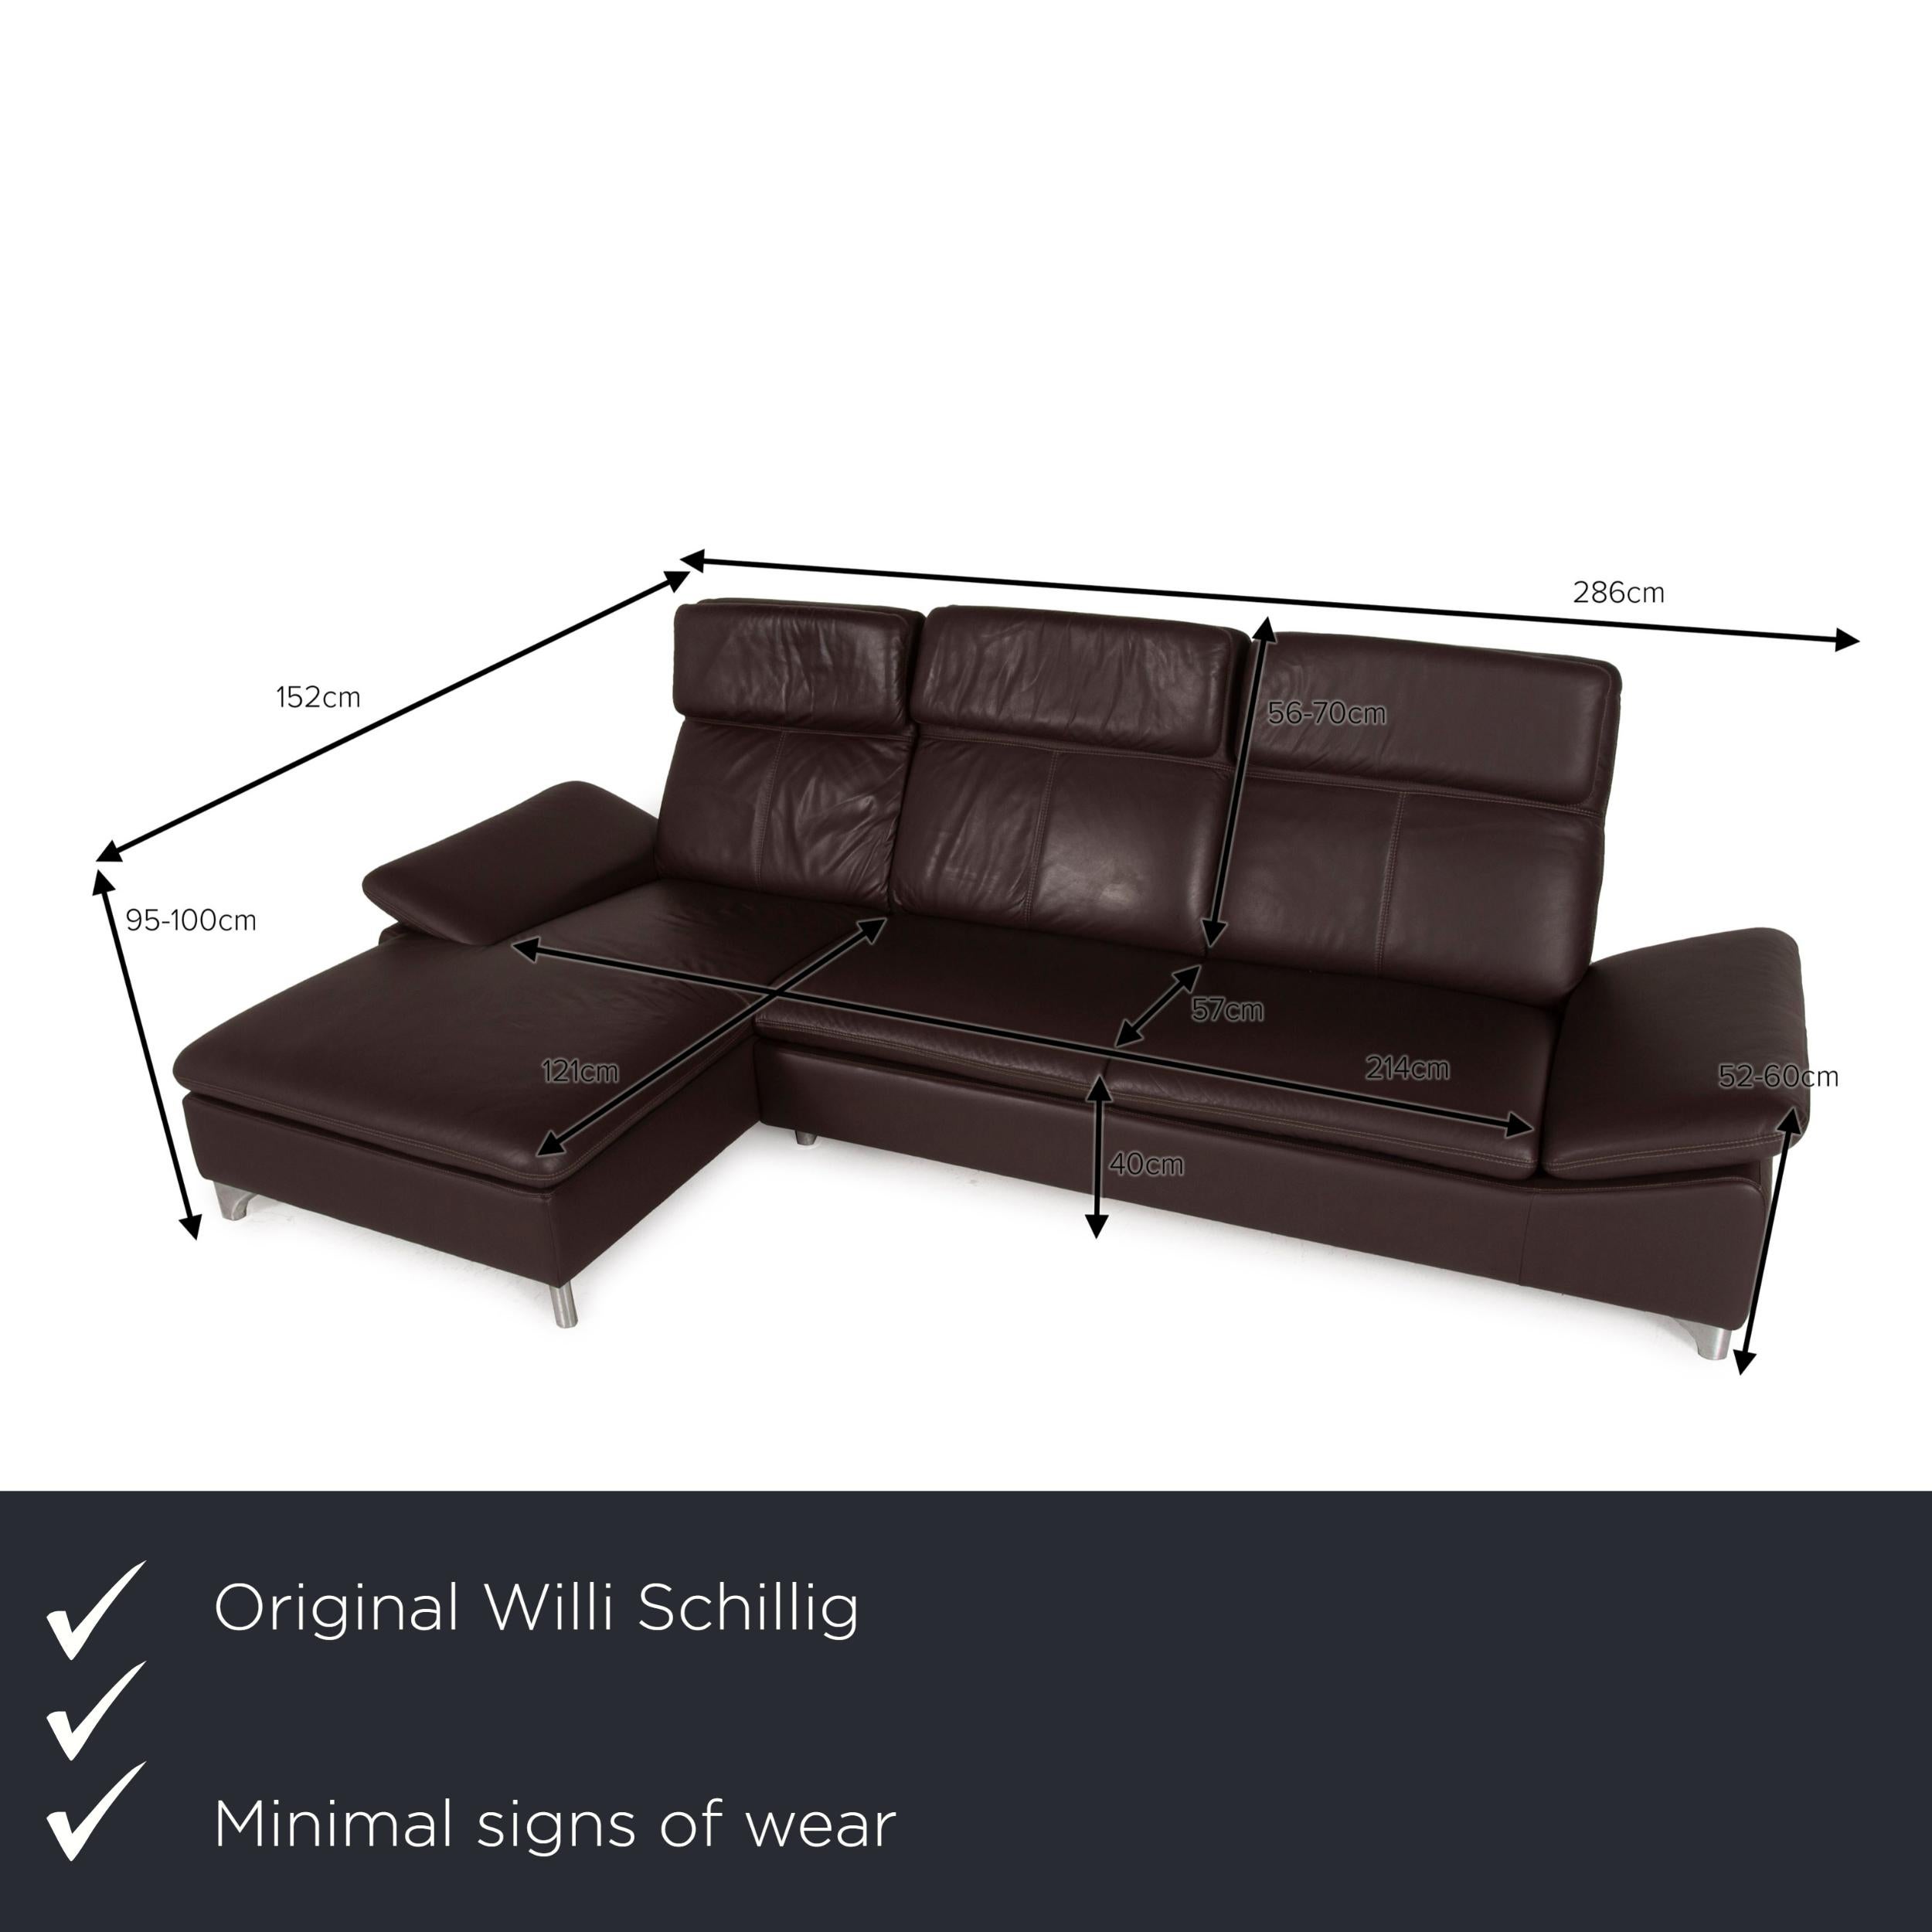 We present to you a Willi Schillig leather sofa brown corner sofa dark brown.
 

 Product measurements in centimeters:
 

Depth: 95
Width: 152
Height: 95
Seat height: 40
Rest height: 52
Seat depth: 57
Seat width: 214
Back height: